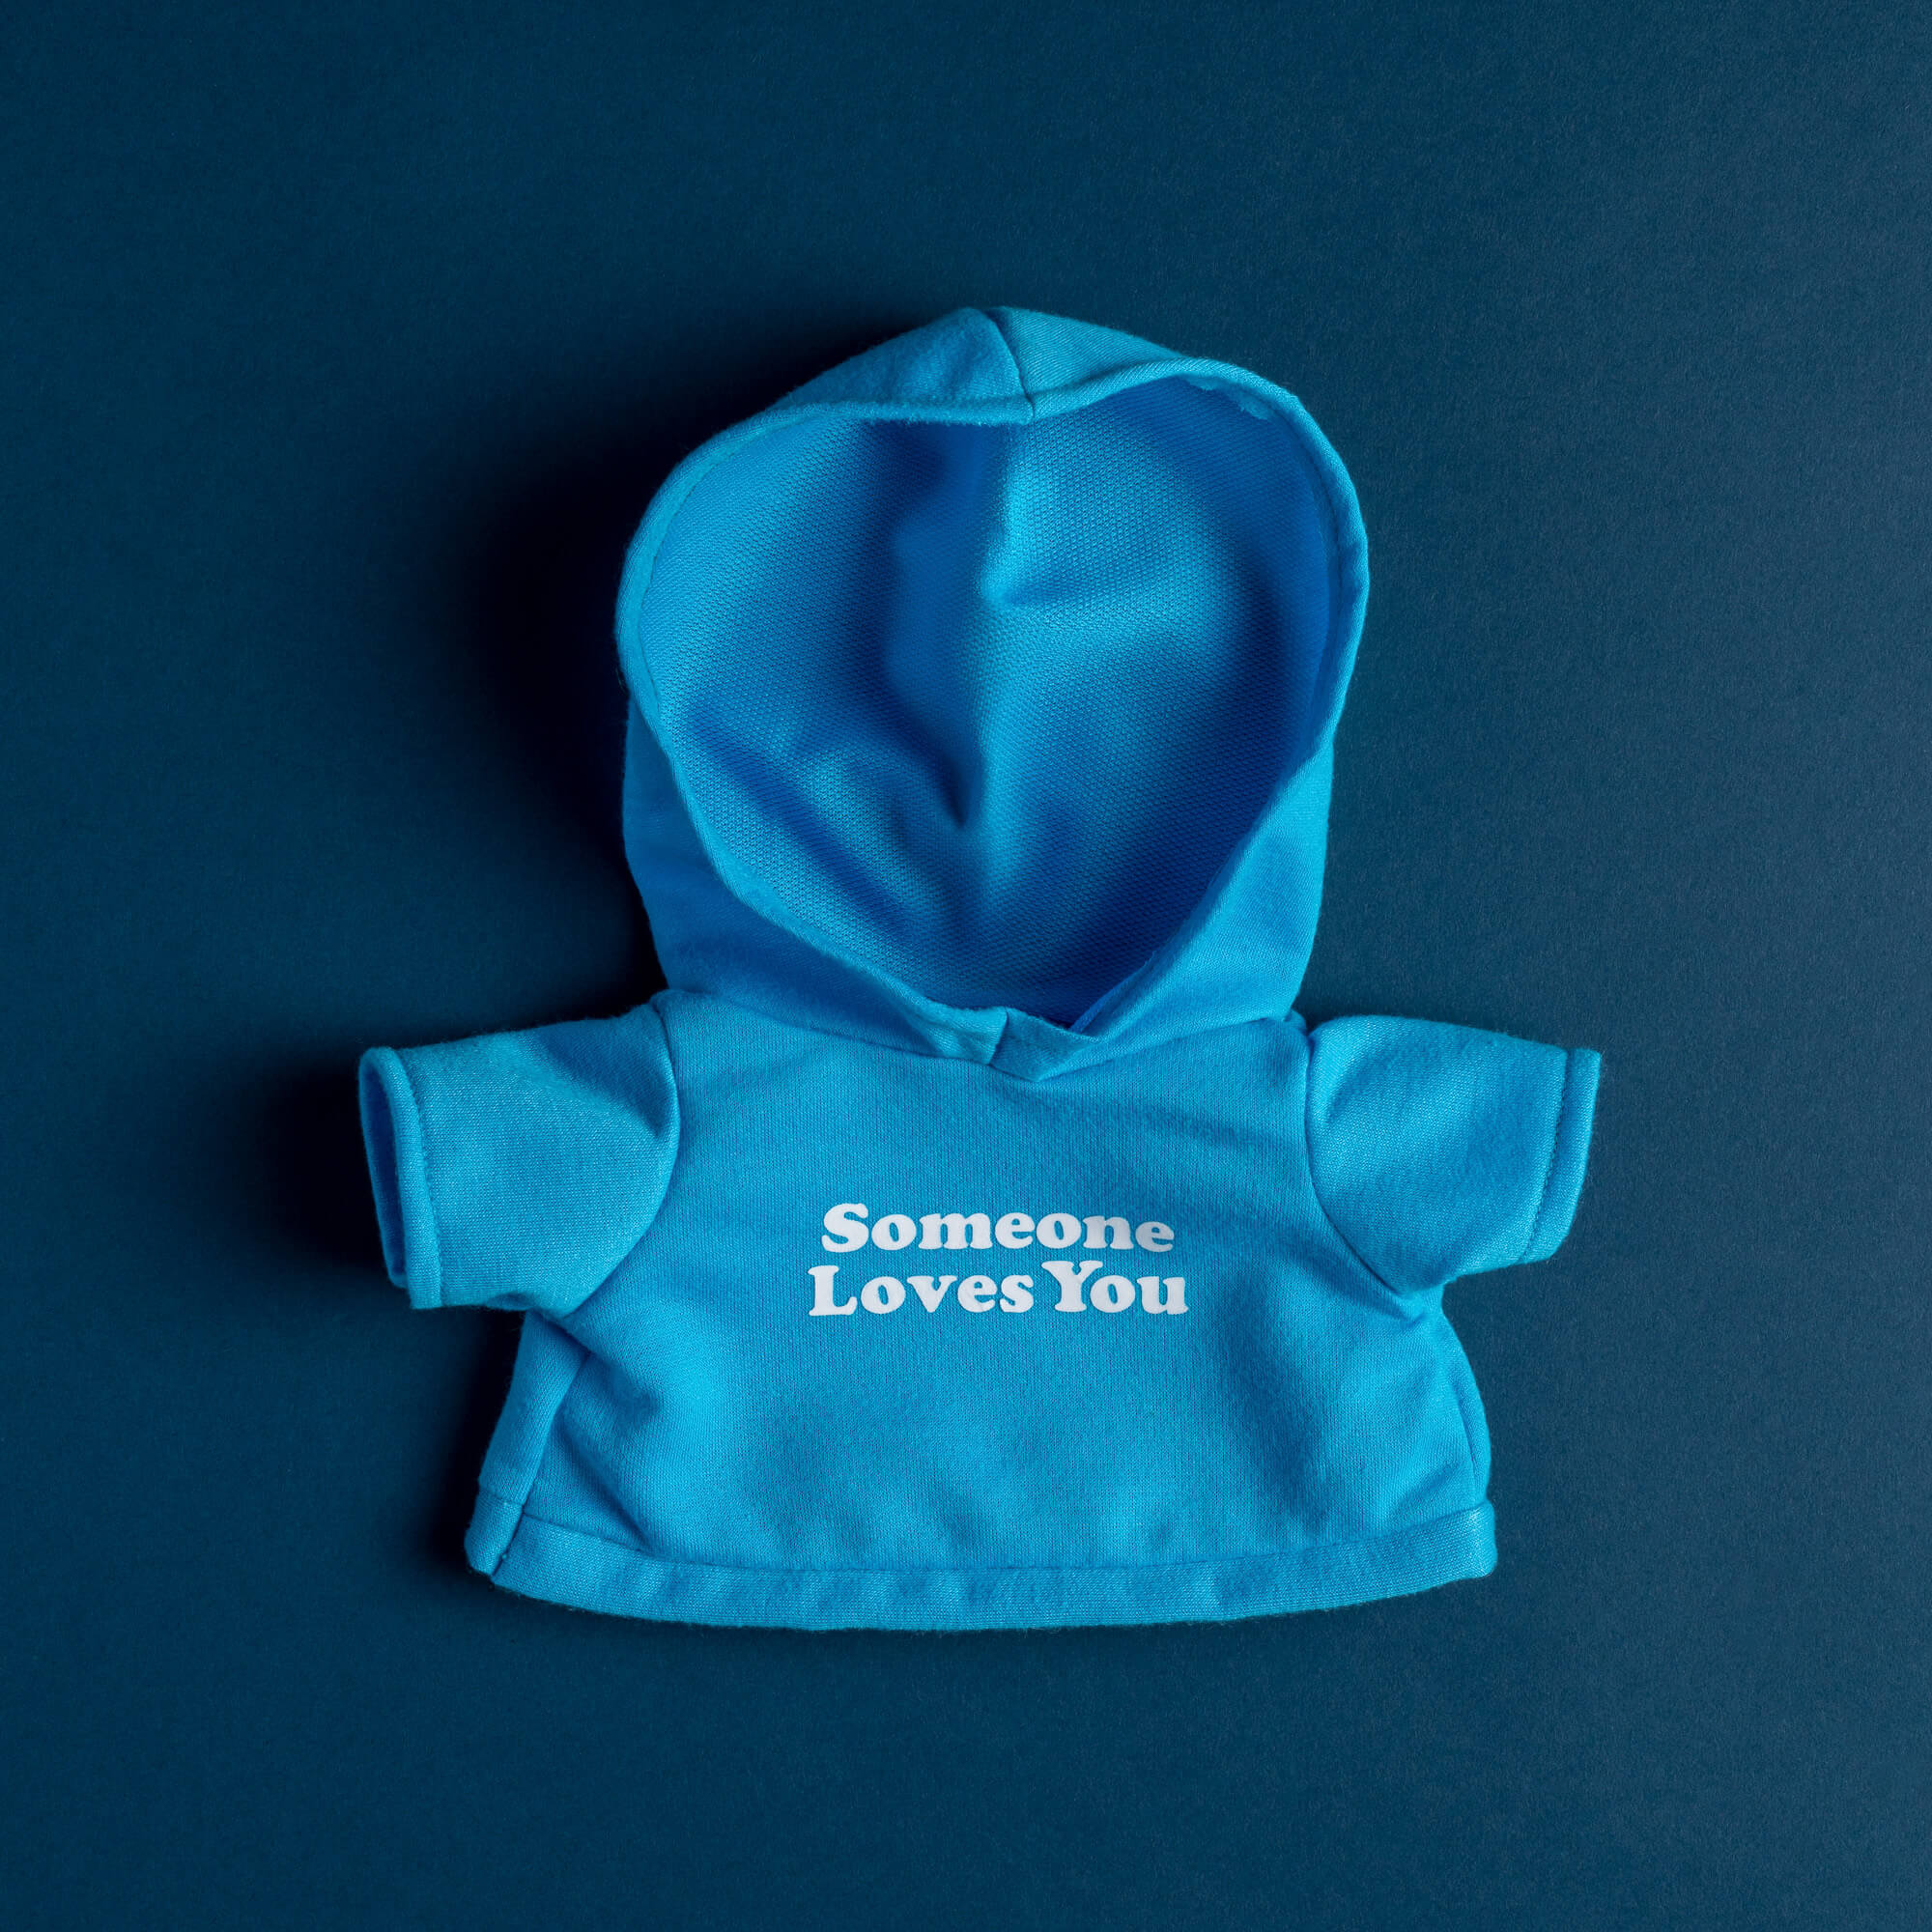 Photo of blue hoodie for animal. Hoodie says "Someone Loves You"